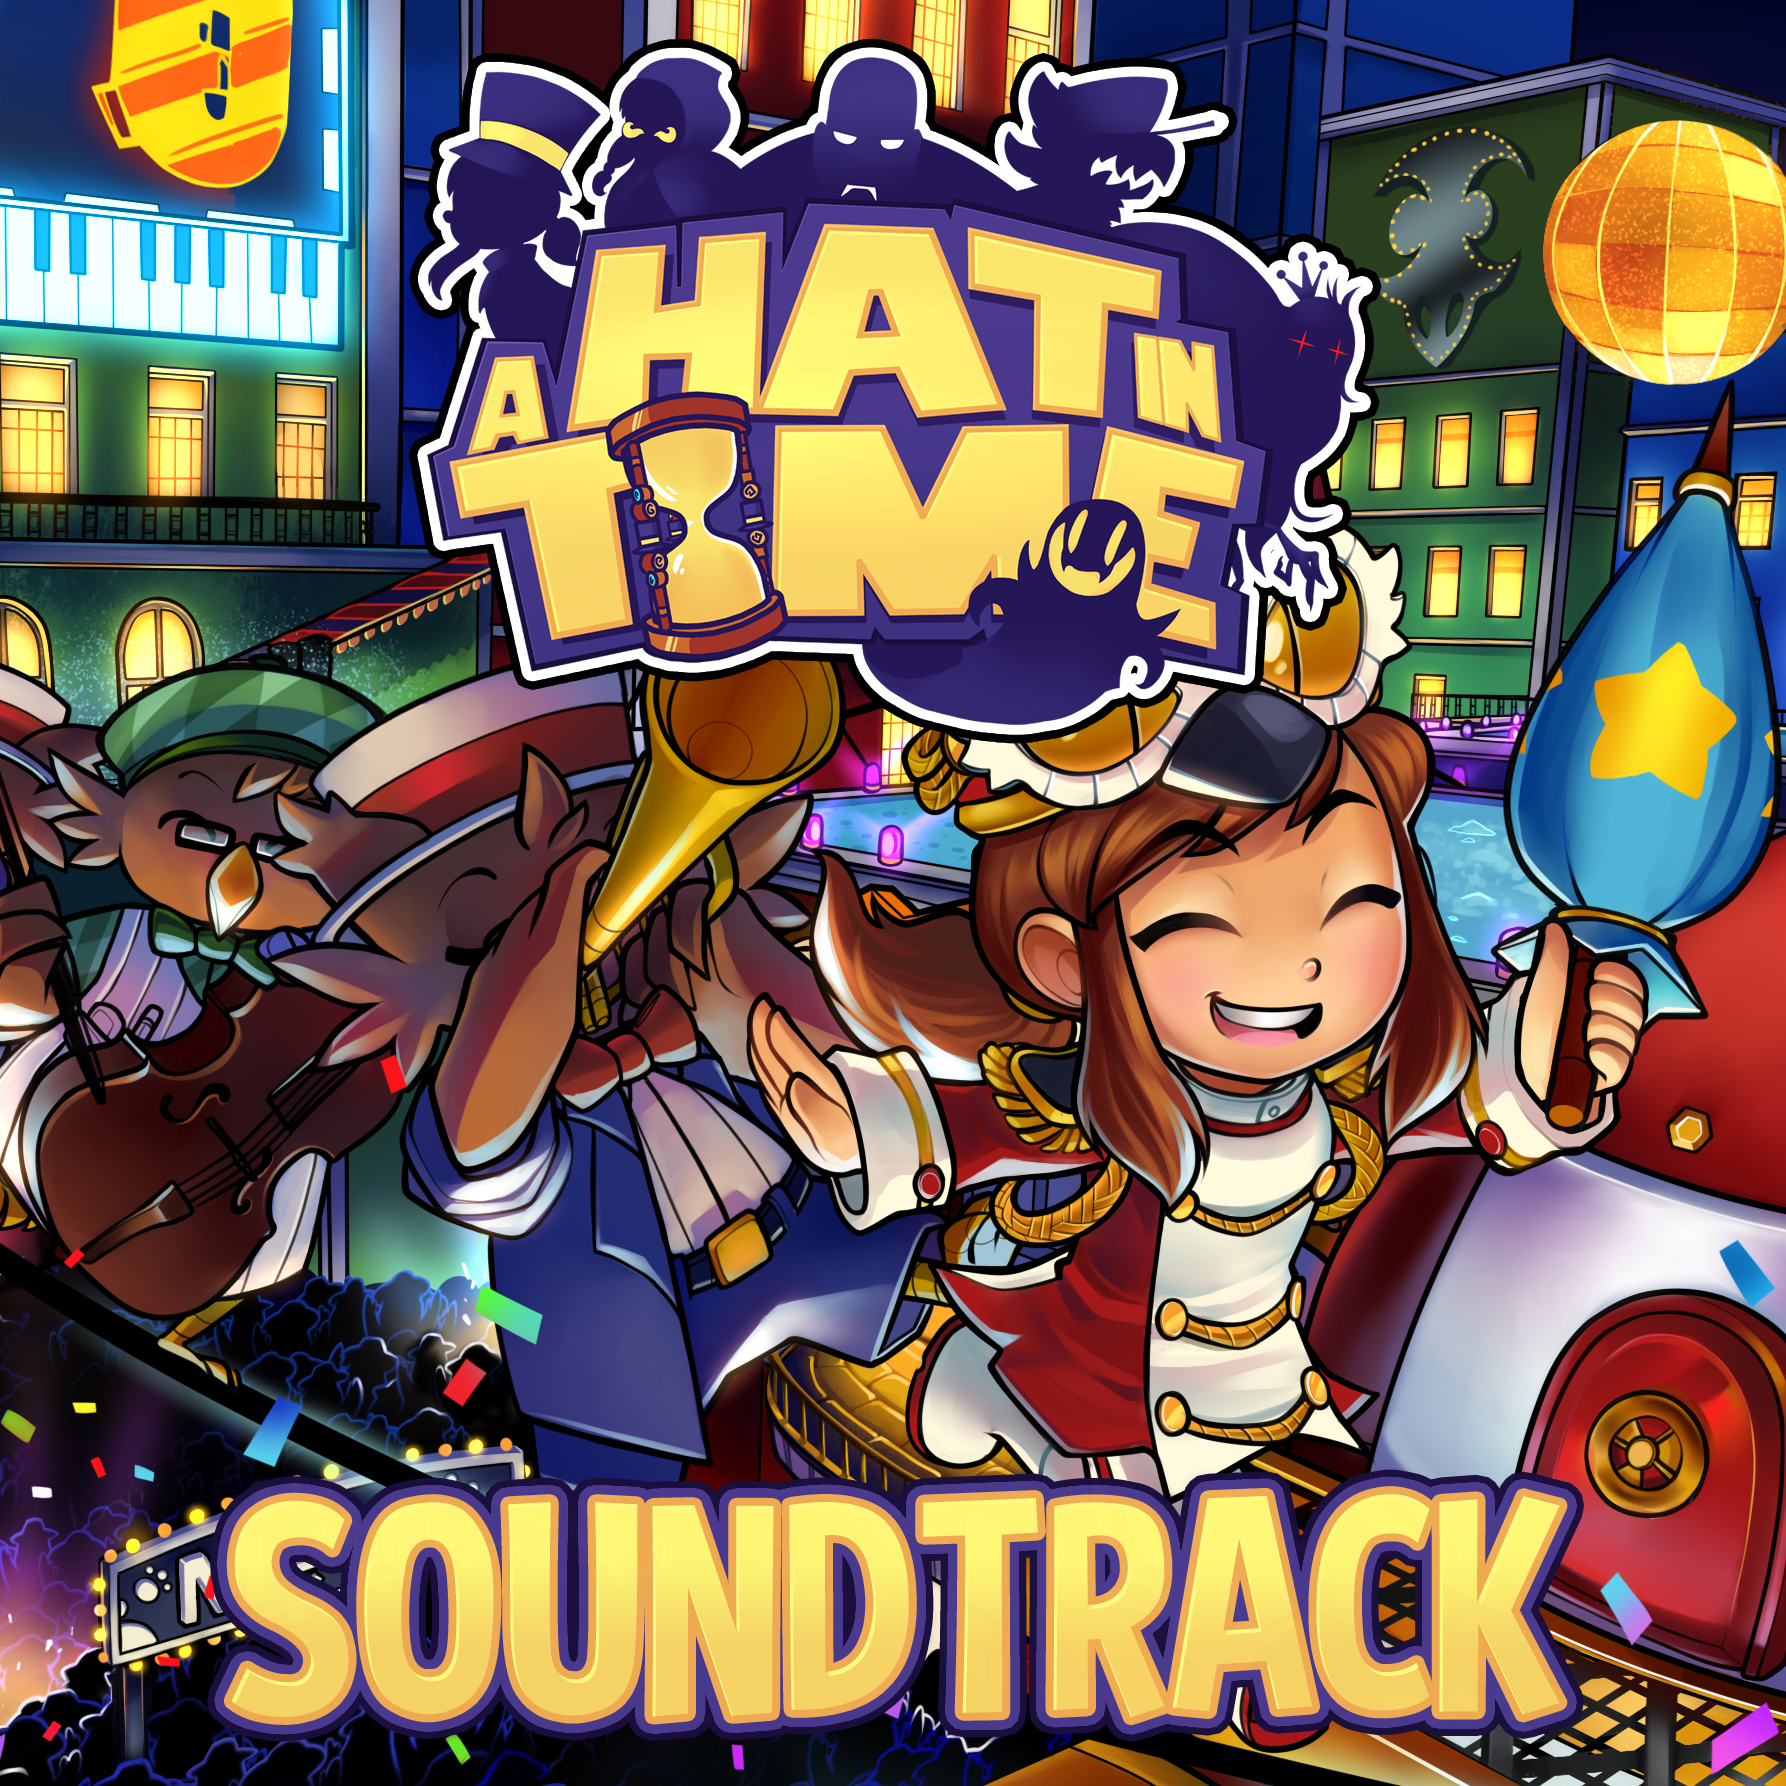 A Hat In Time The Music Of Ost Mp3 Download A Hat In Time The Music Of Ost Soundtracks For Free - metro peaceful song roblox id